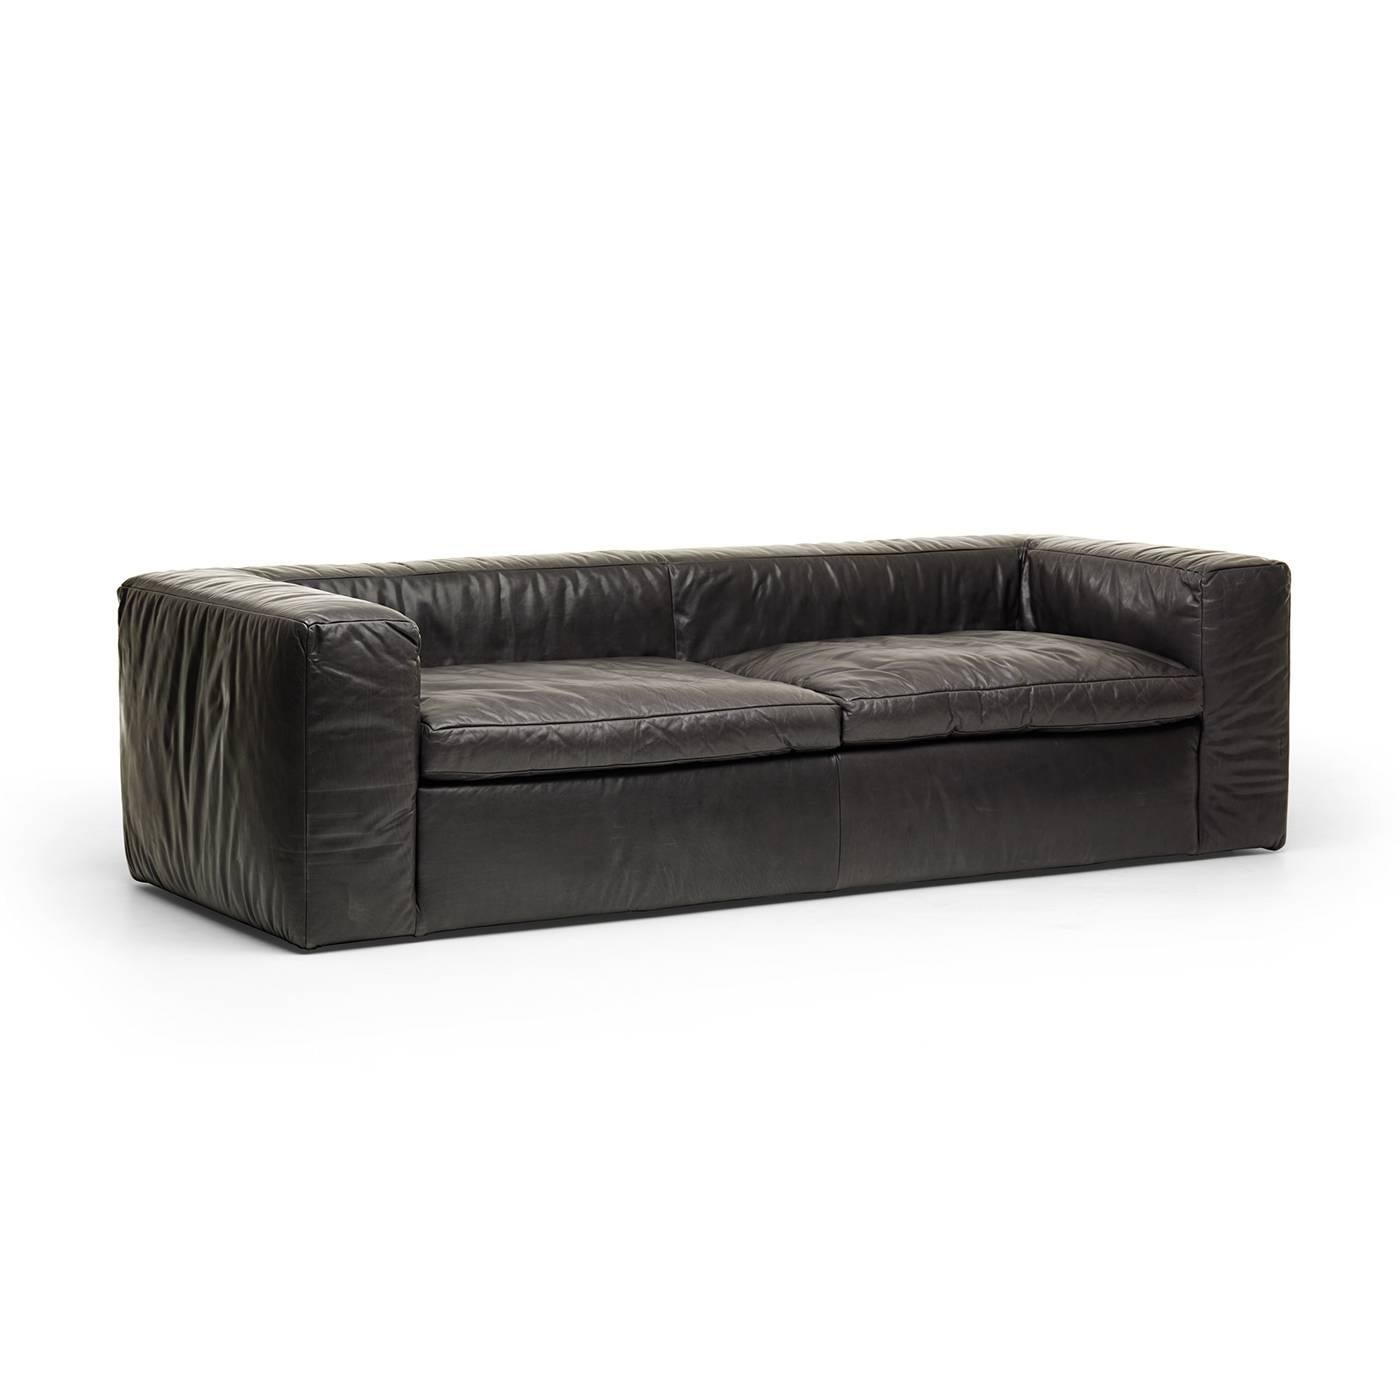 The essential silhouette of this sofa and its comfortable, plush cushions make it a sumptuous piece that will enliven the look of an Industrial-style or contemporary living room. This superb piece was designed by Alberto Colzani in 2013. Its